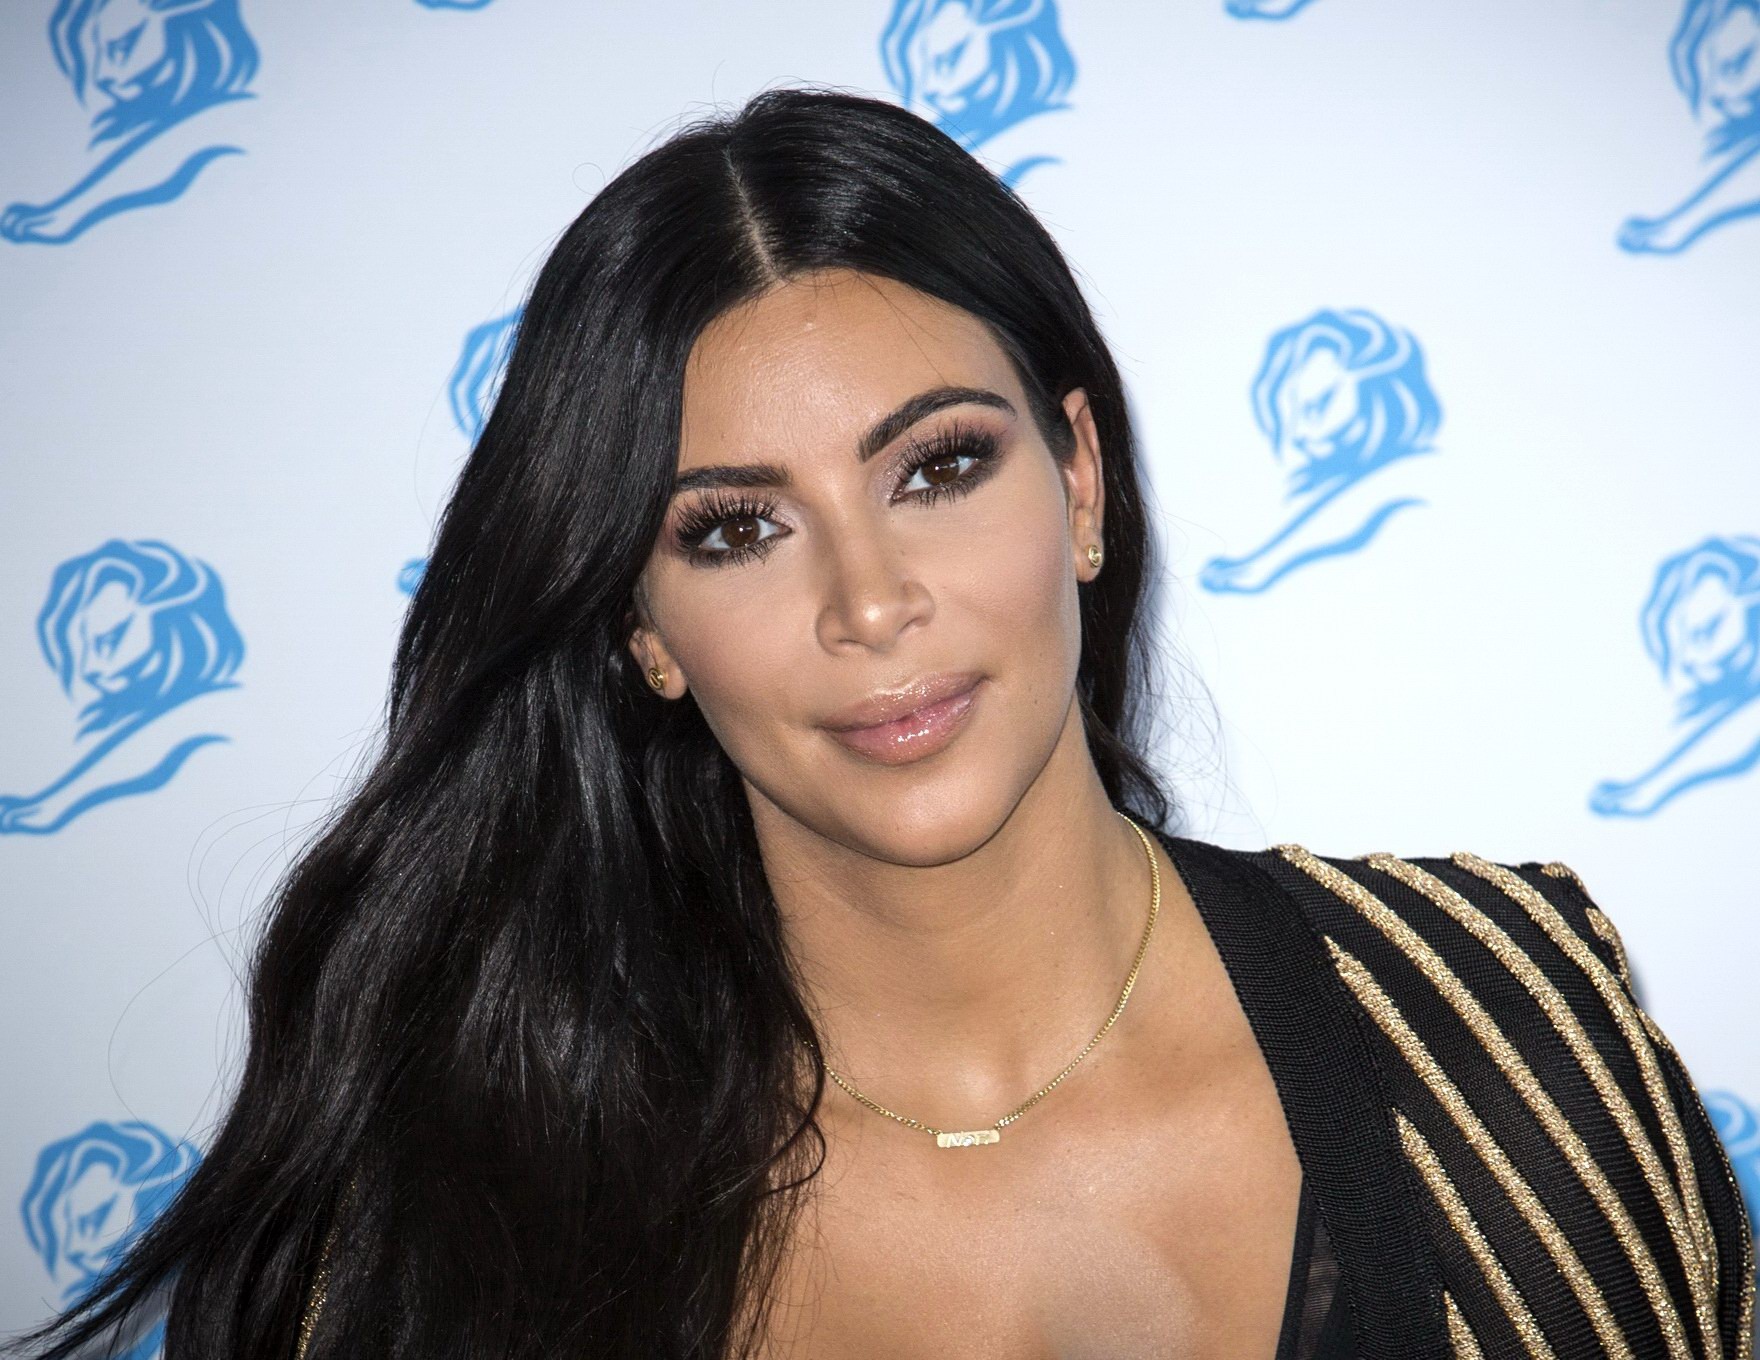 Kim Kardashian showing huge cleavage at the Cannes Lions event #75160343